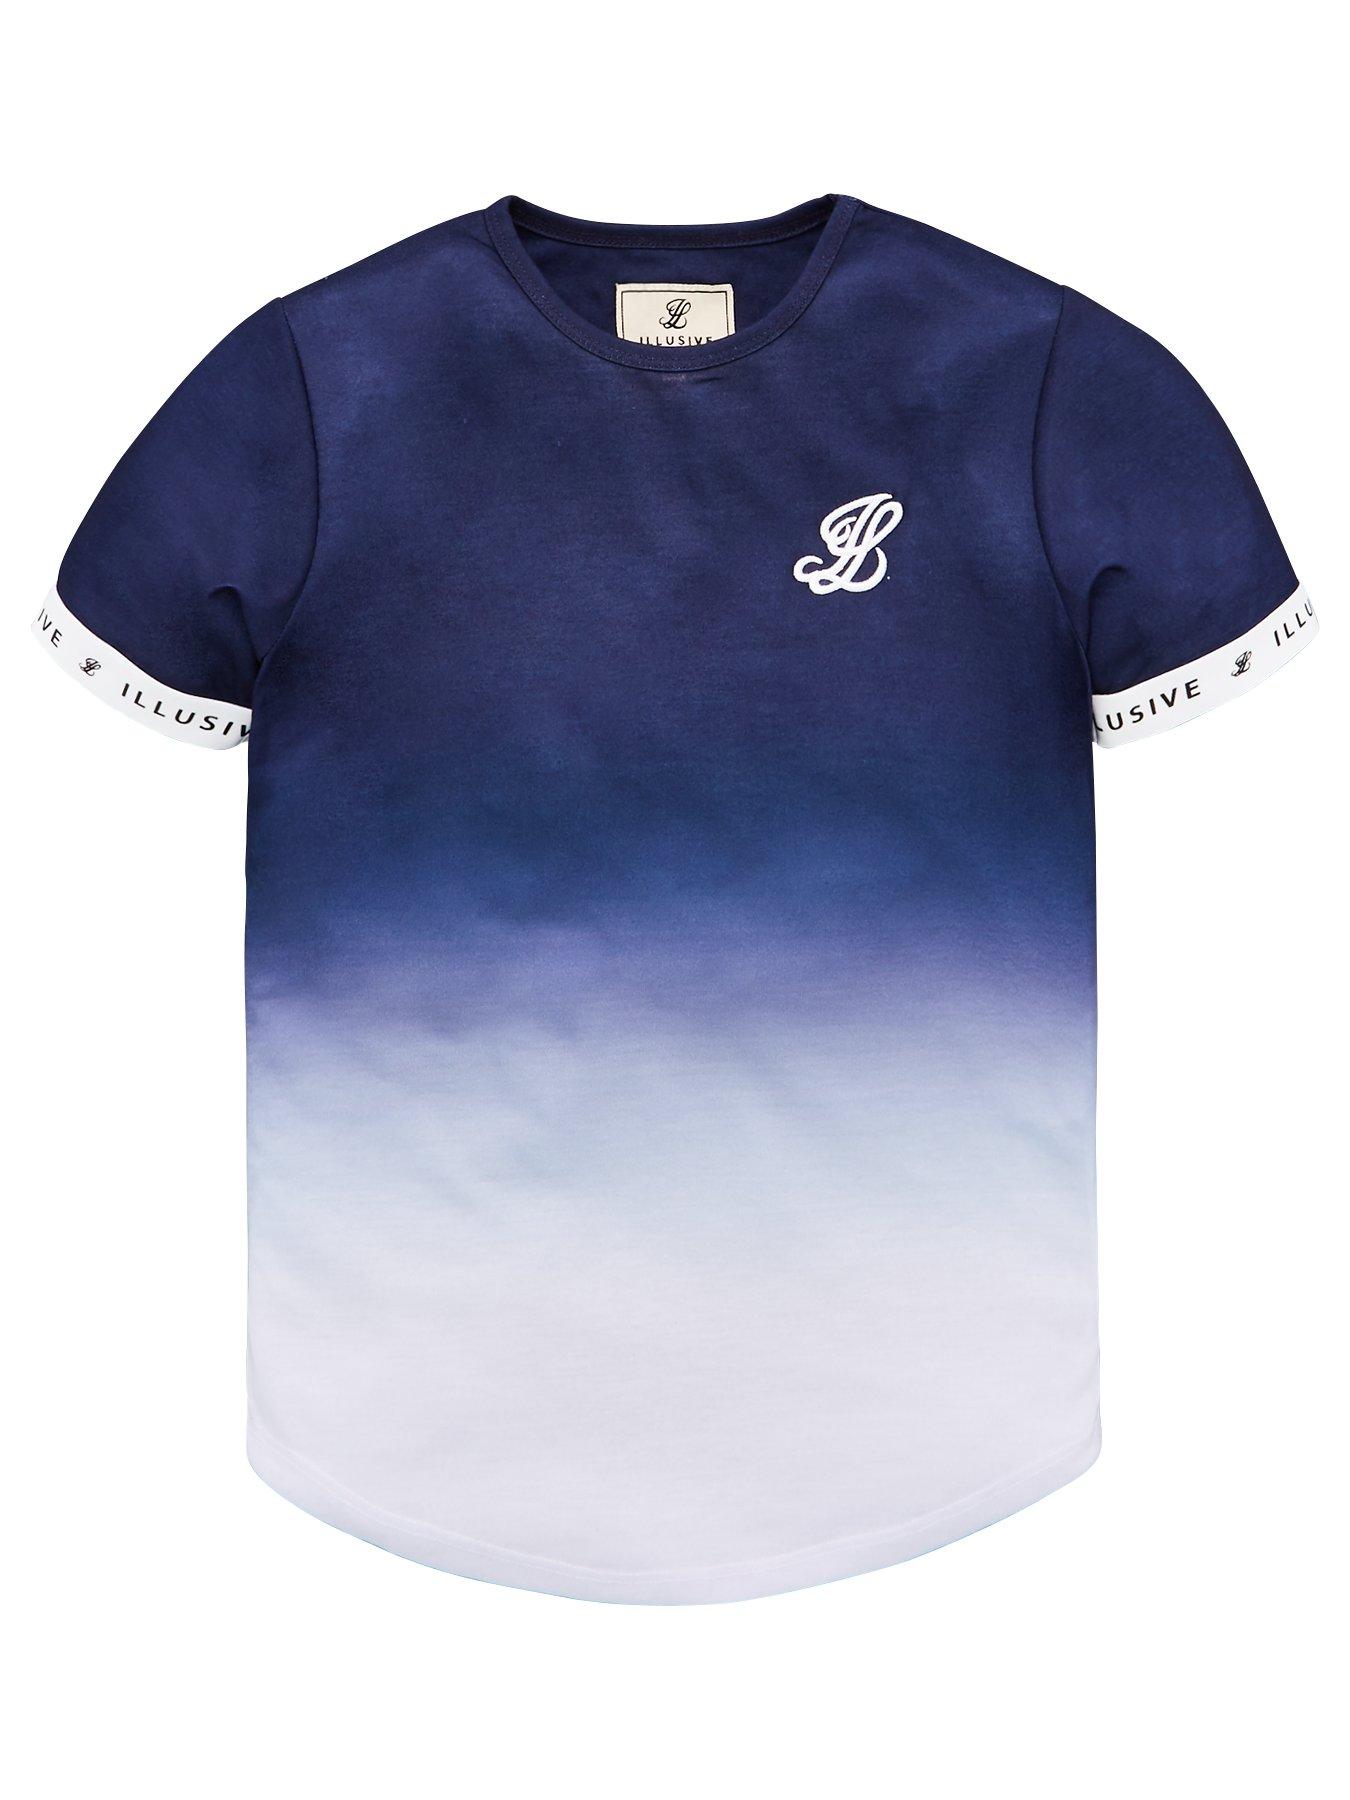 Boys Fade Tech T Shirt Navy - roblox clothes code faded jean timberland